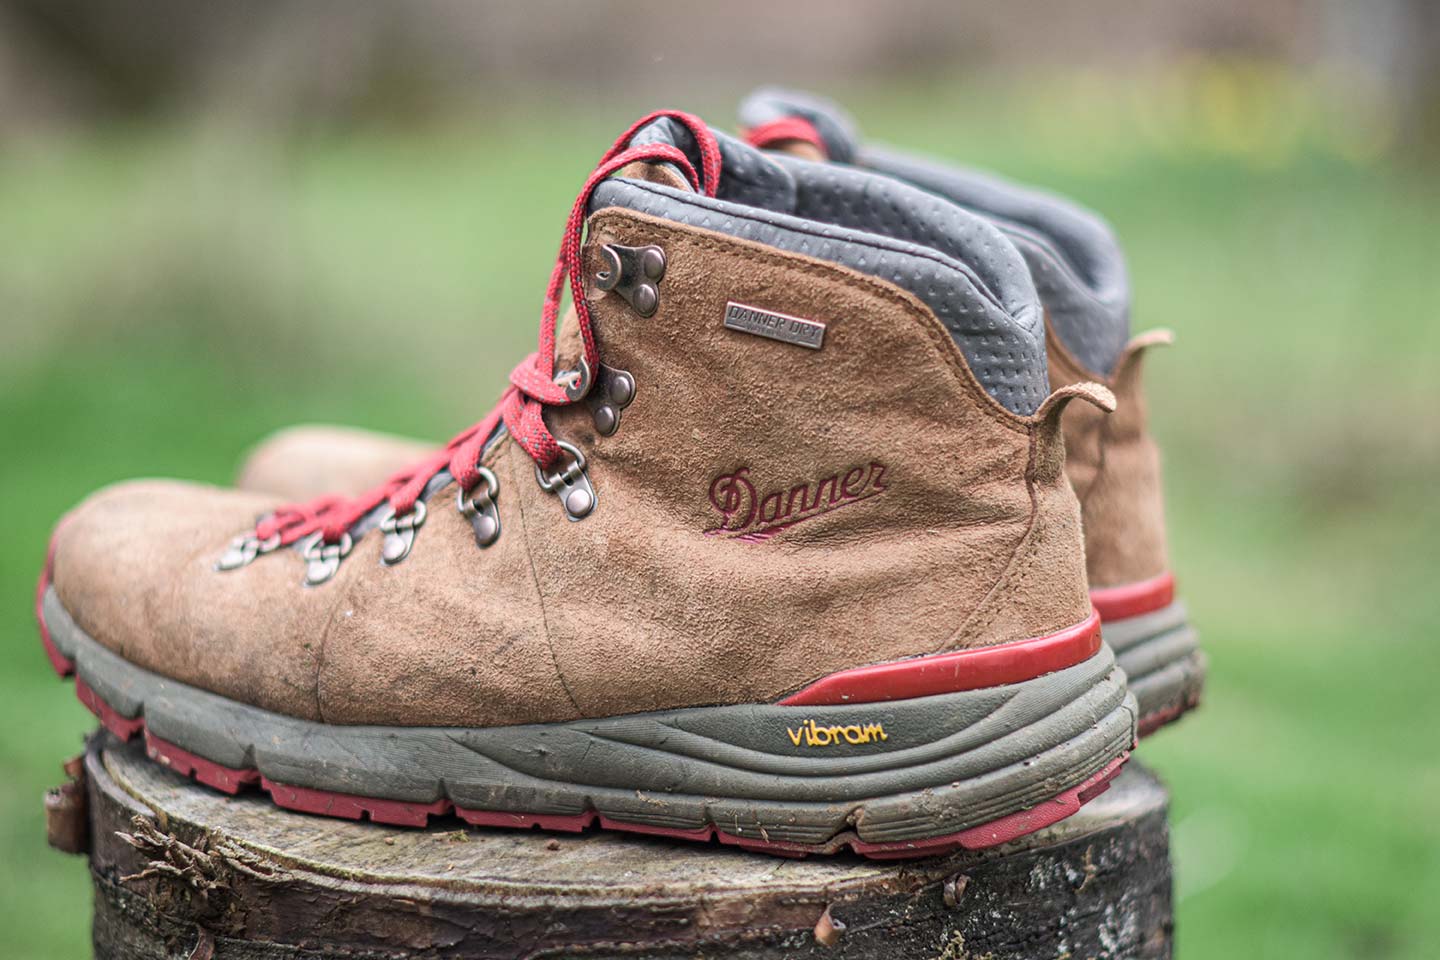 Brown boots with red laces with Danner on the side, a gray midsole, and red outer sole